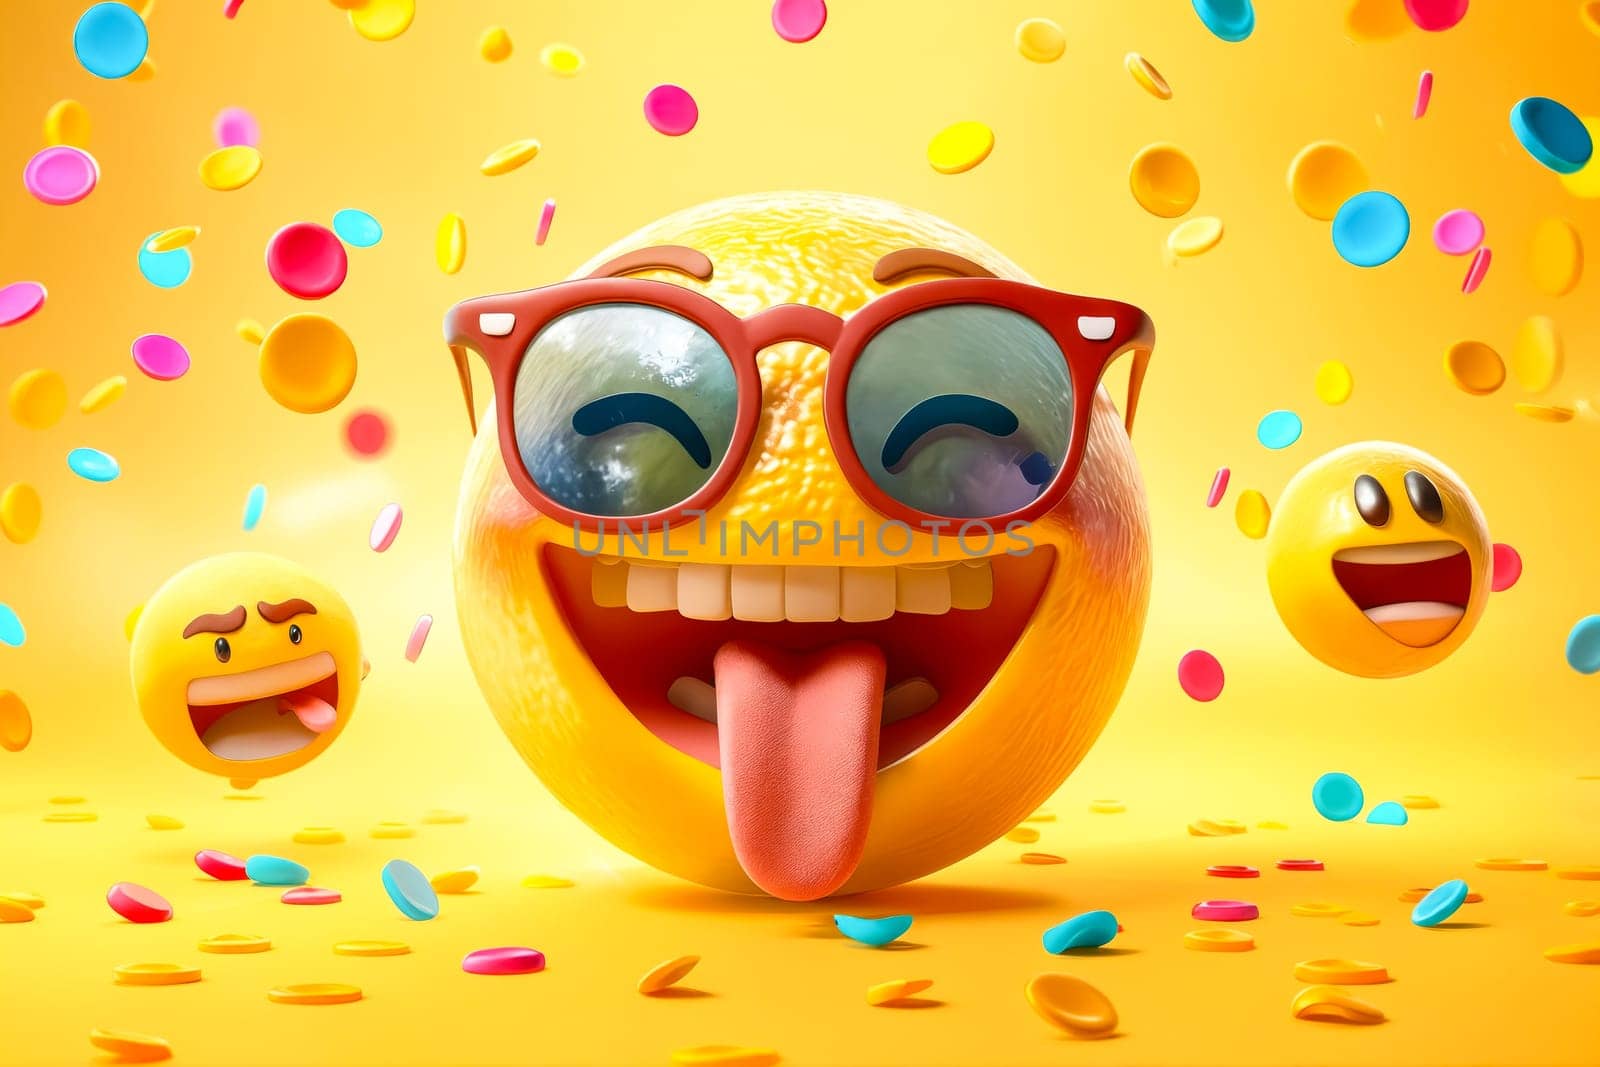 A yellow emoji with glasses and a tongue sticking out is surrounded by colorful confetti. The image conveys a lighthearted and fun mood, as the emoji appears to be enjoying the confetti. Generative AI